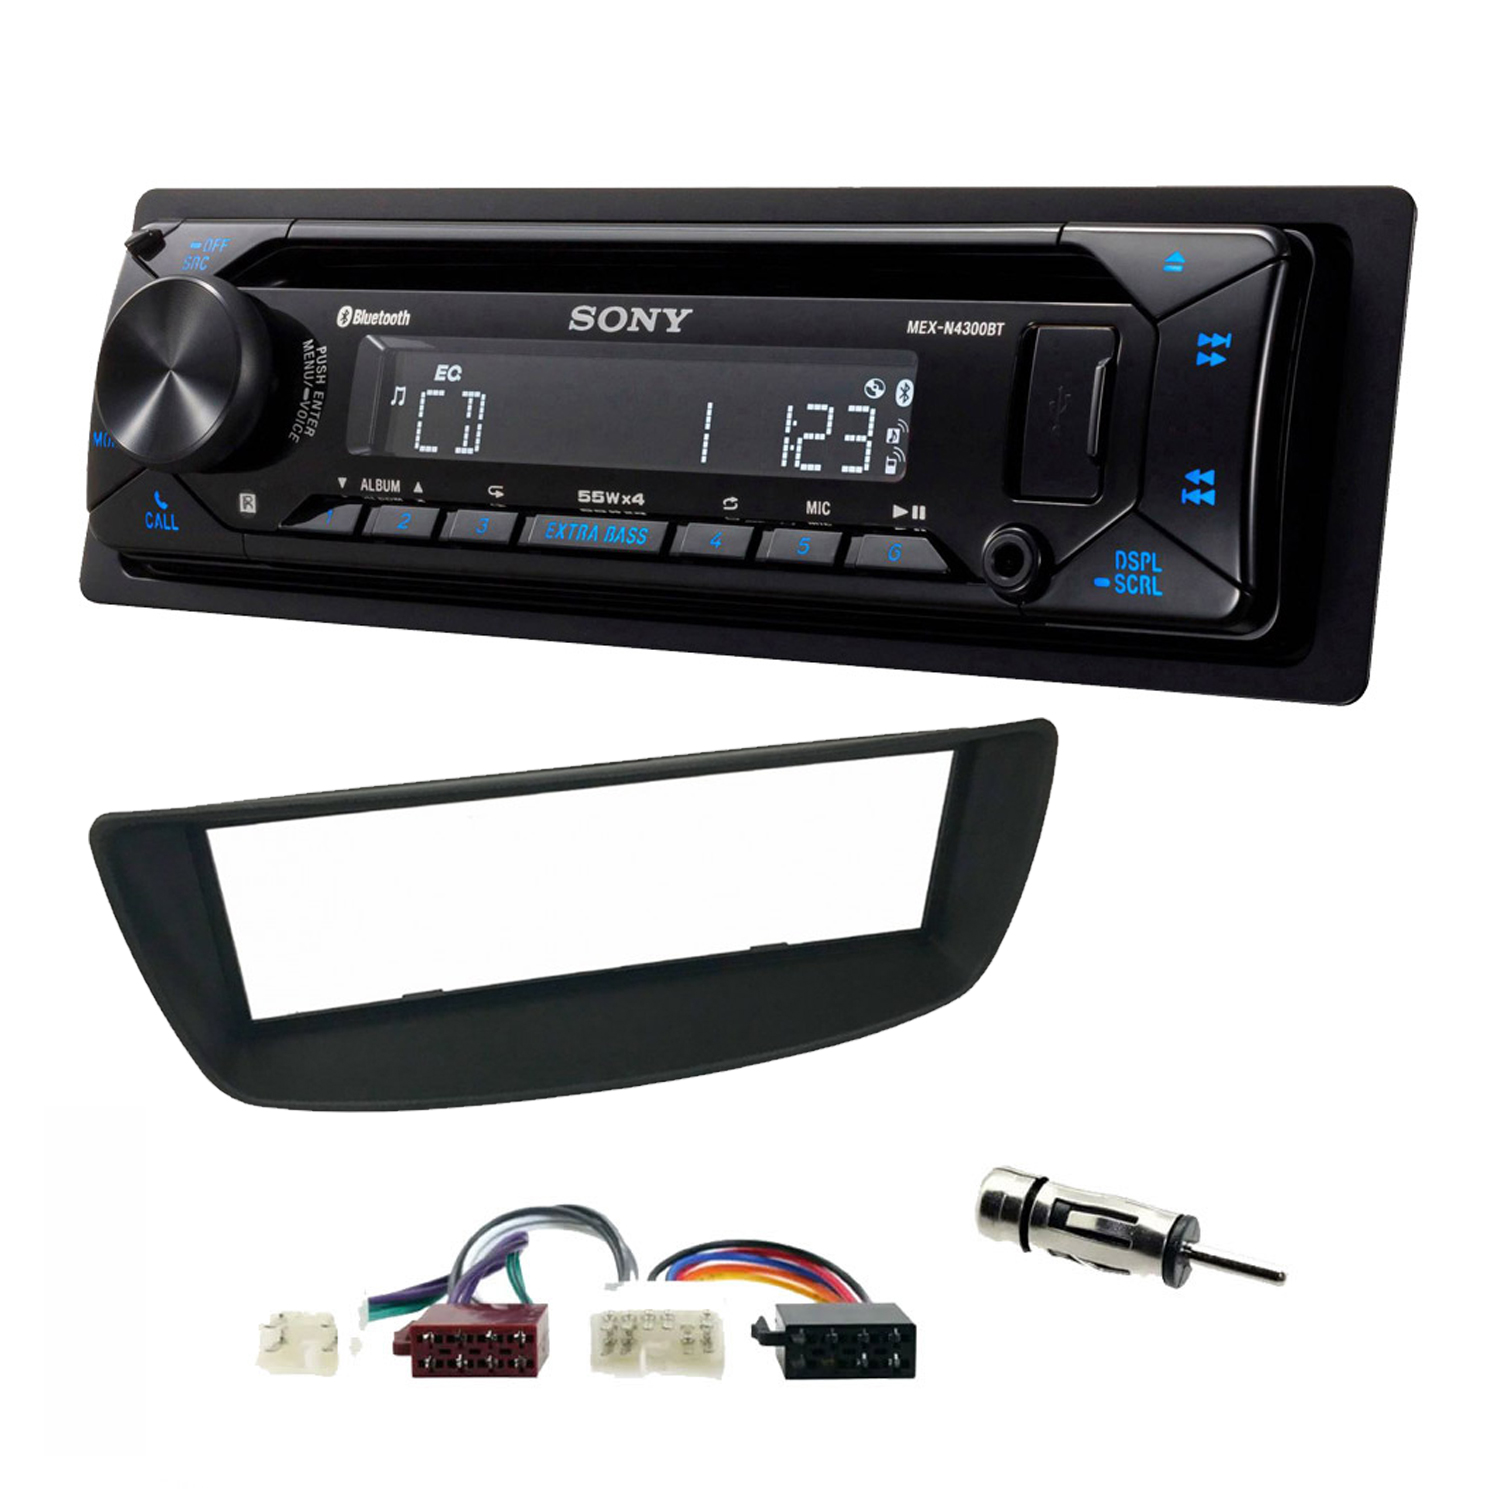 Toyota Aygo 2005 - 2014 Sony Bluetooth CD MP3 USB AUX iPhone iPod Car Stereo Player Upgrade Kit